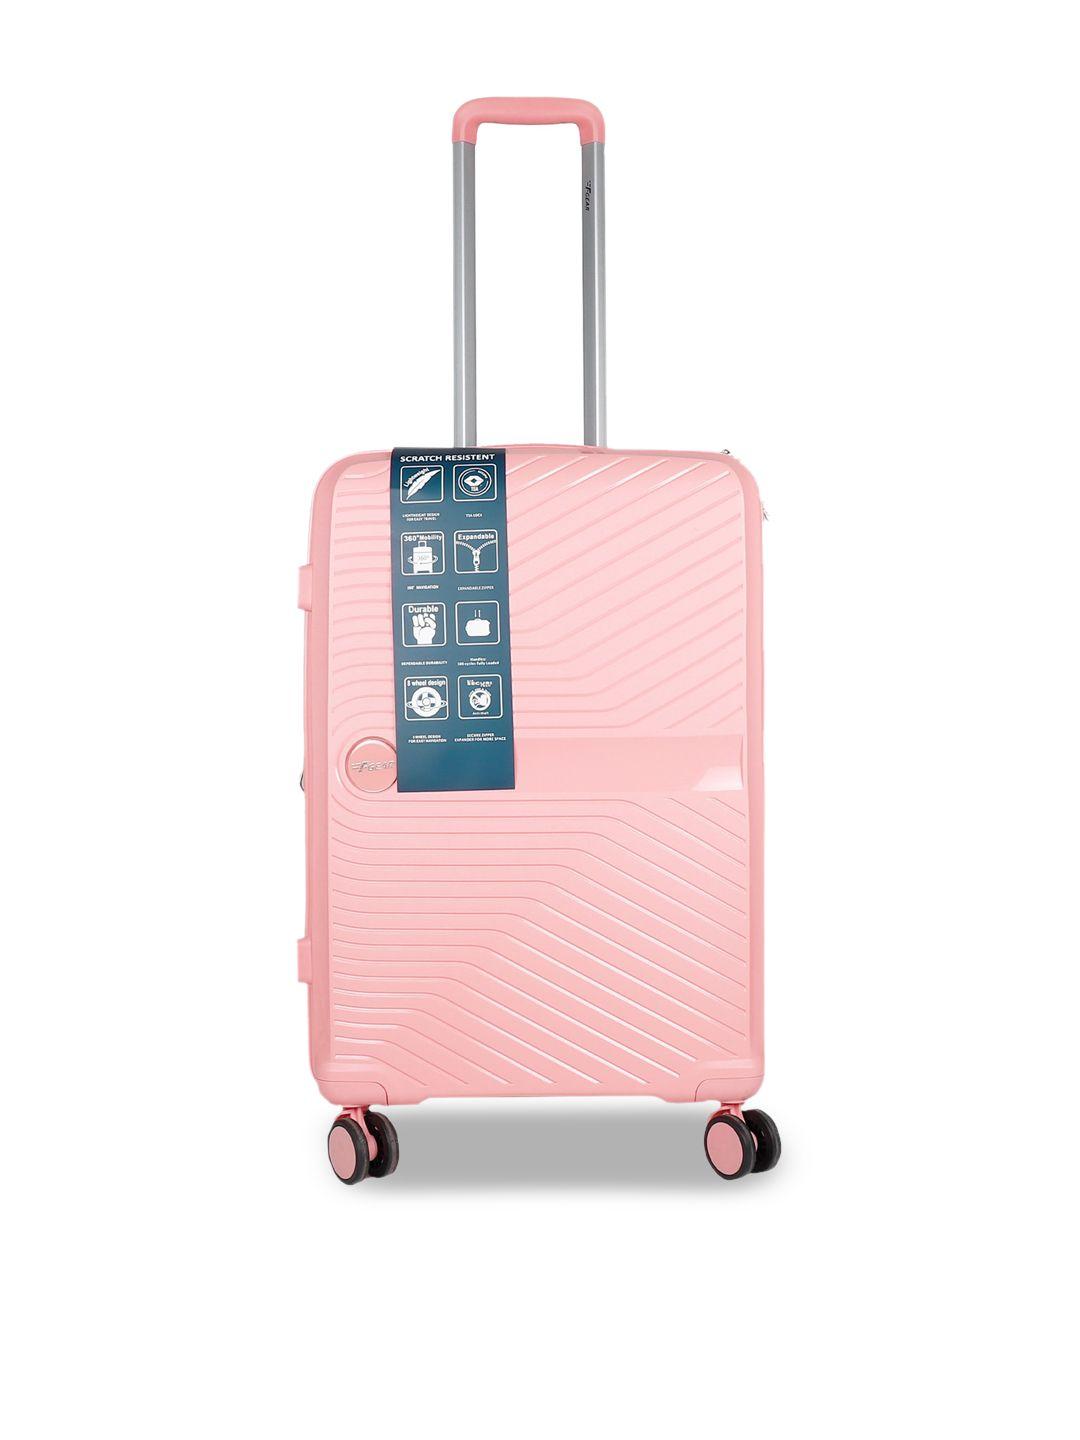 f gear hard-sided textured large trolley suitcase